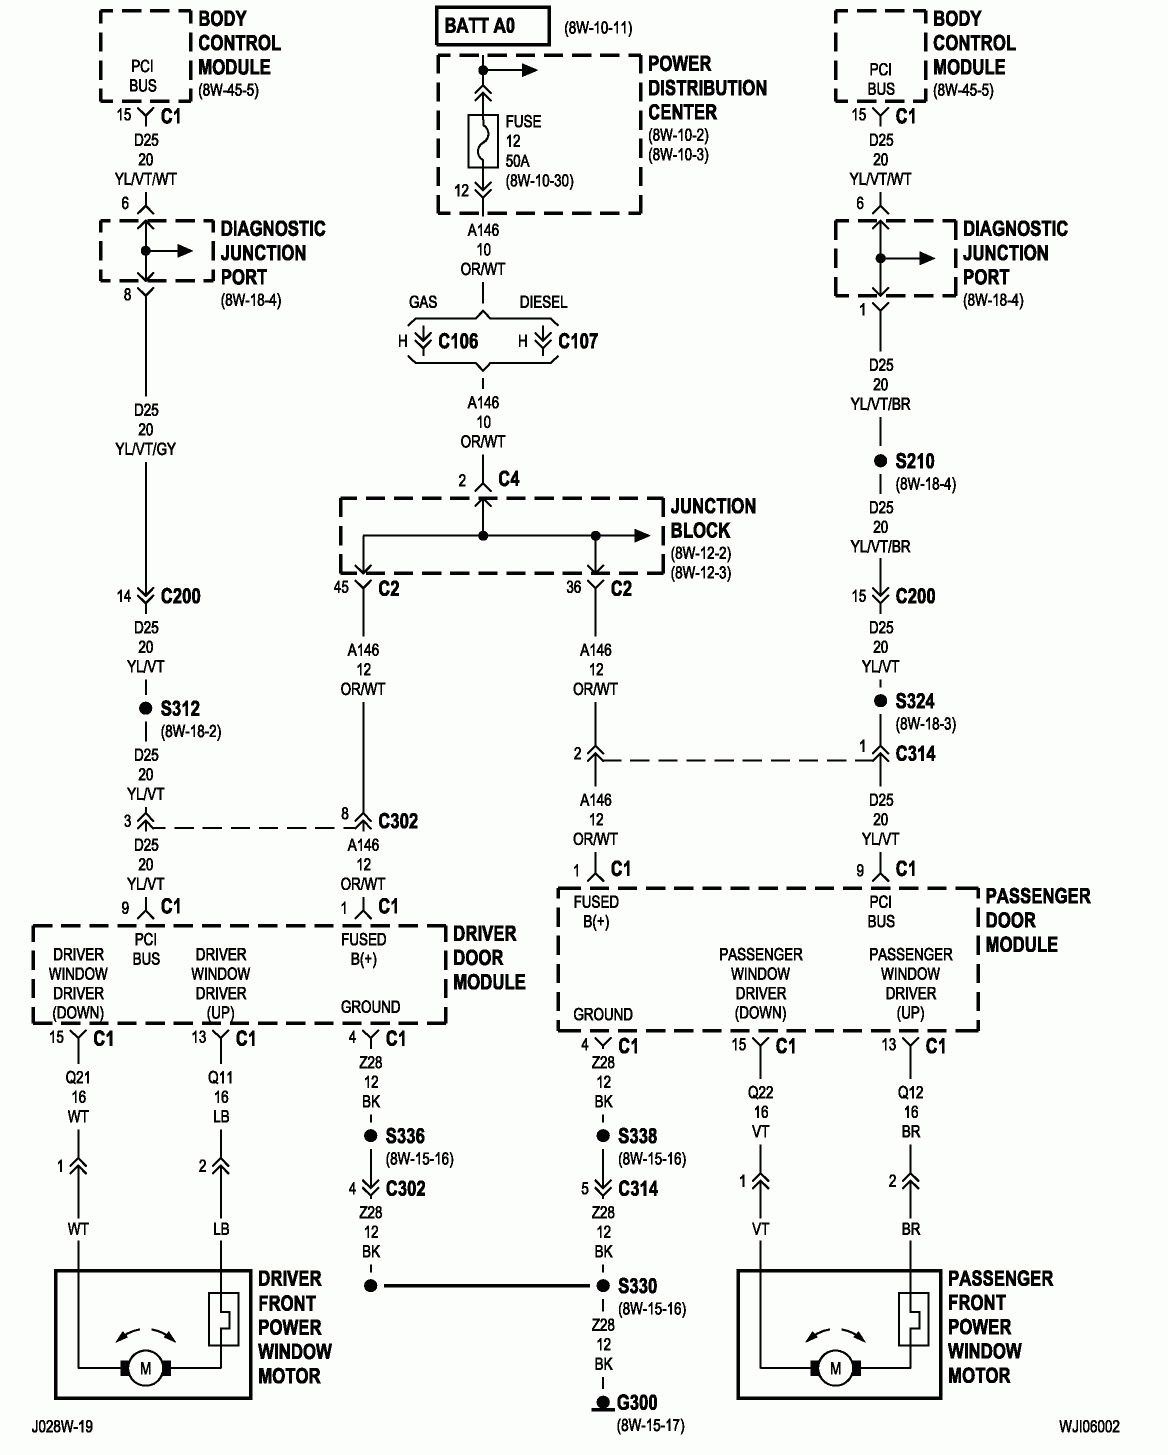 2001 Jeep Cherokee Wiring Diagram Moreover Grand Wiring Diagrams Source